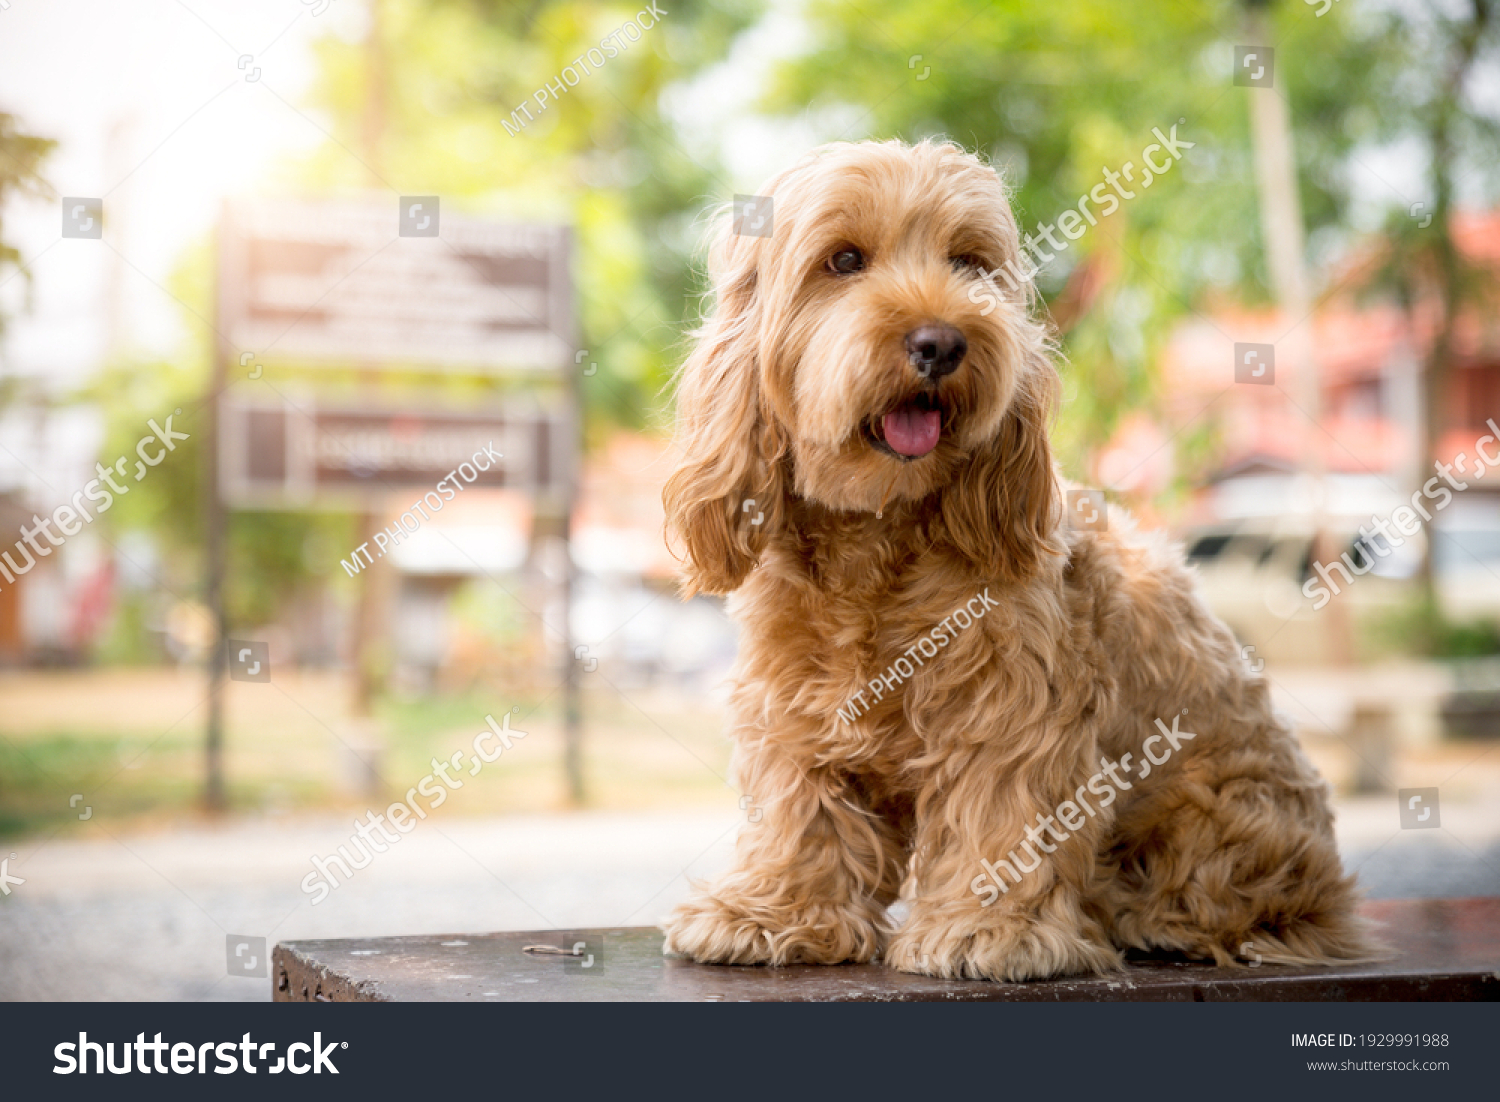 Cute Cockapoo dog sit on table. Puppy Cockapoo or adorable cockerpoo is mixed breeding animal (brown fur Cocker Spaniel + Poodle) funny hairy canine training with owner. Cocker spaniel in garden #1929991988